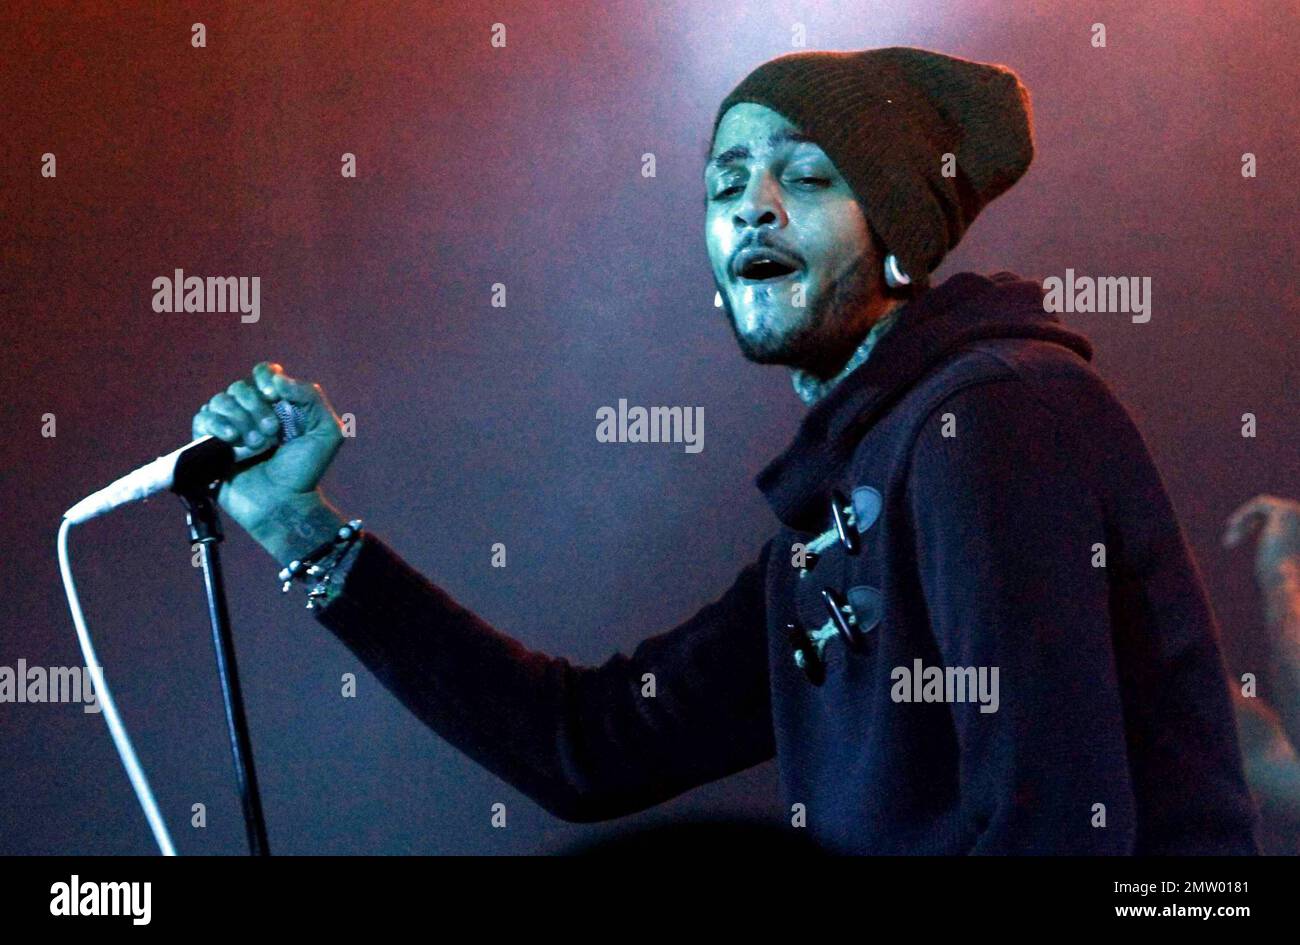 Gym Class Heroes frontman Travie McCoy closes out his UK tour with a  performance at Kings College. The tour is in promotion of his debut solo  album "Lazarus," which was released in